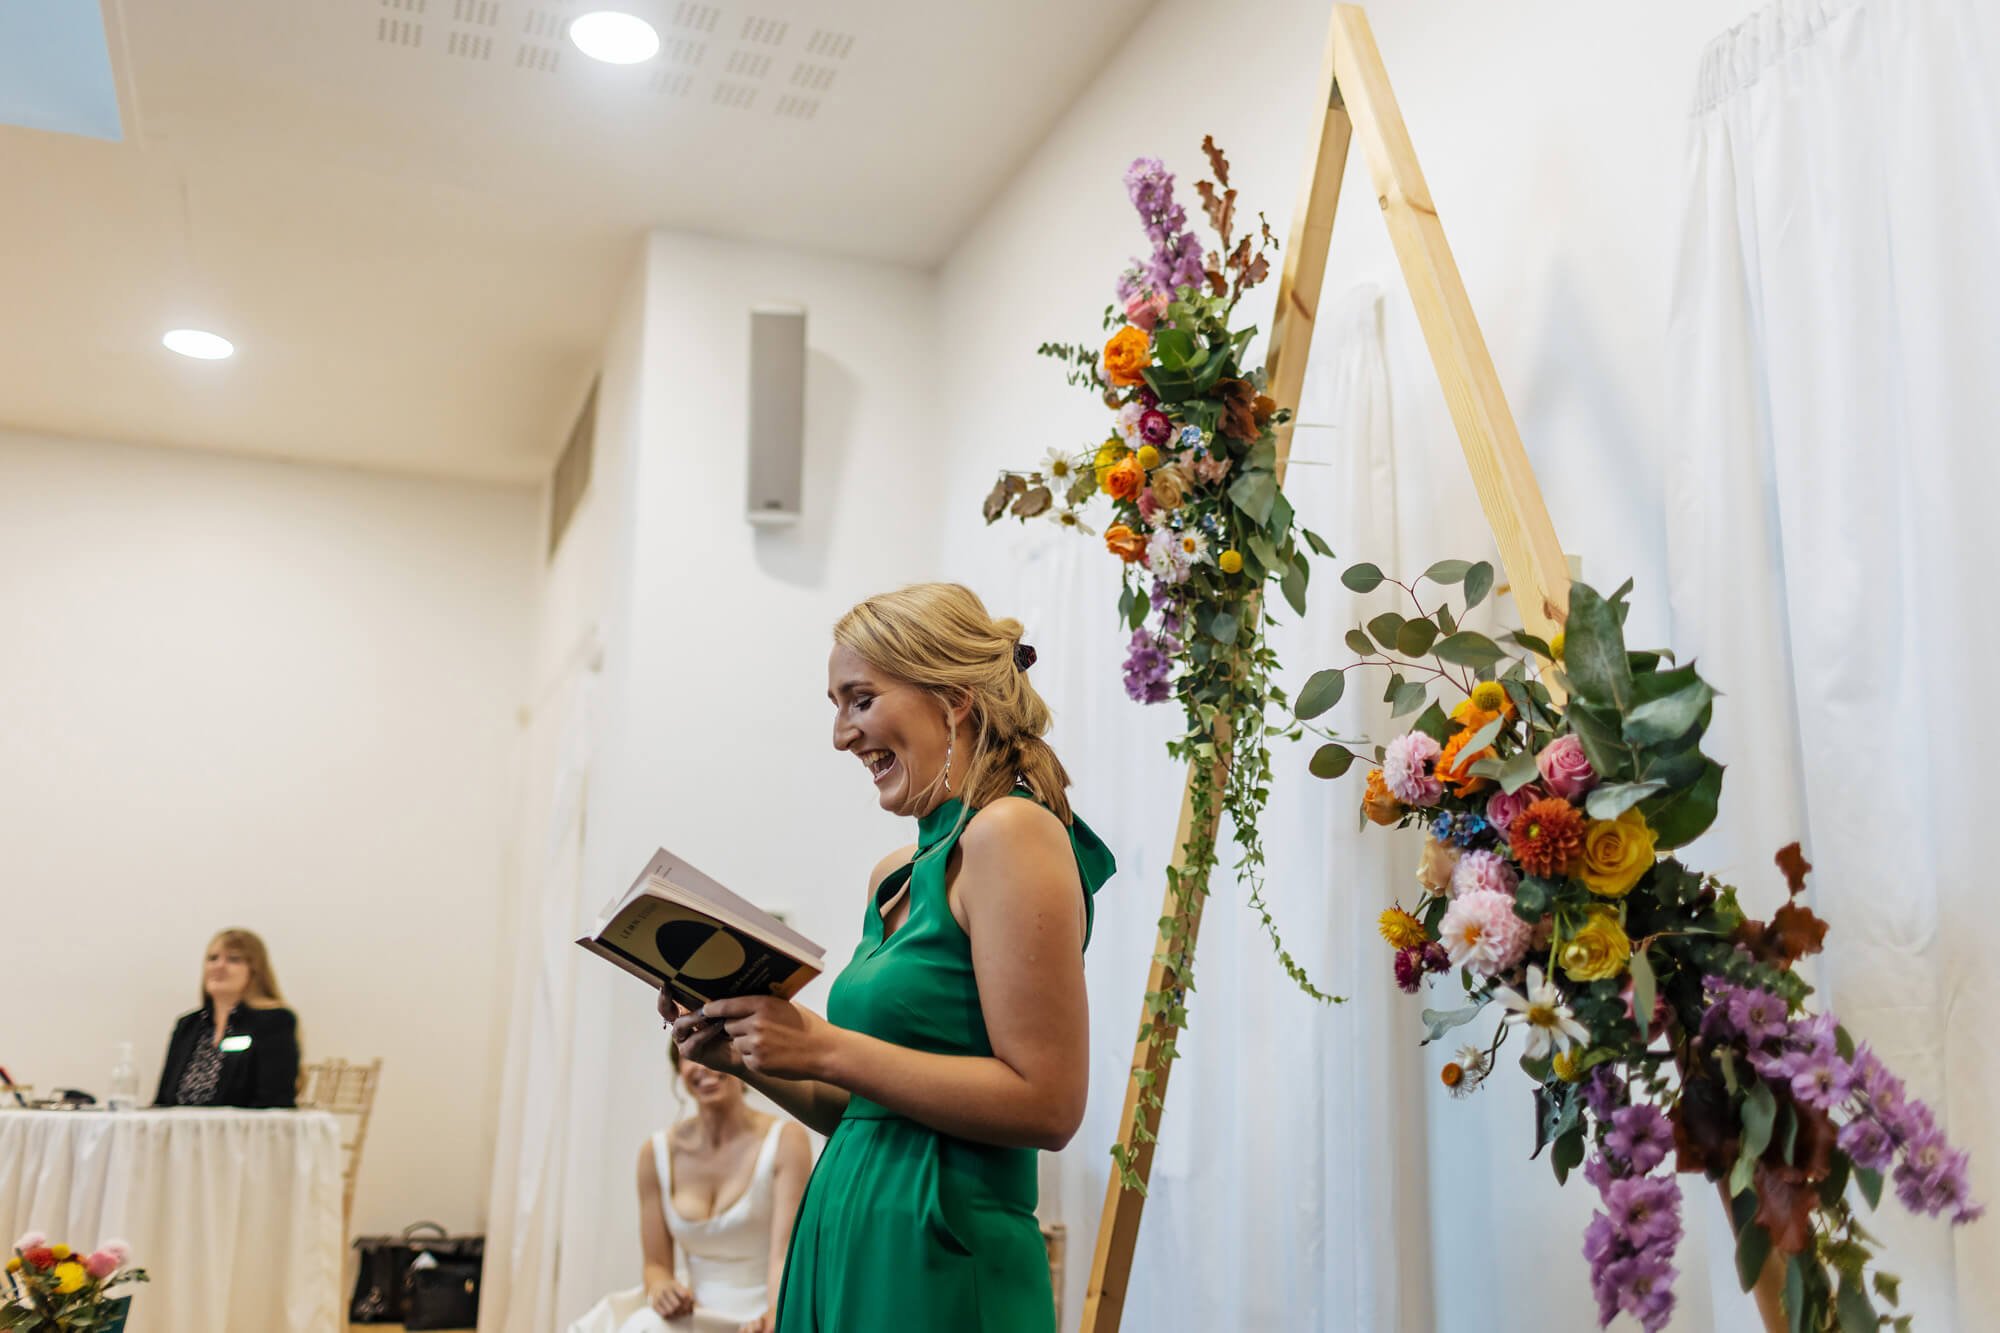 Wedding guests performs a reading during the ceremony